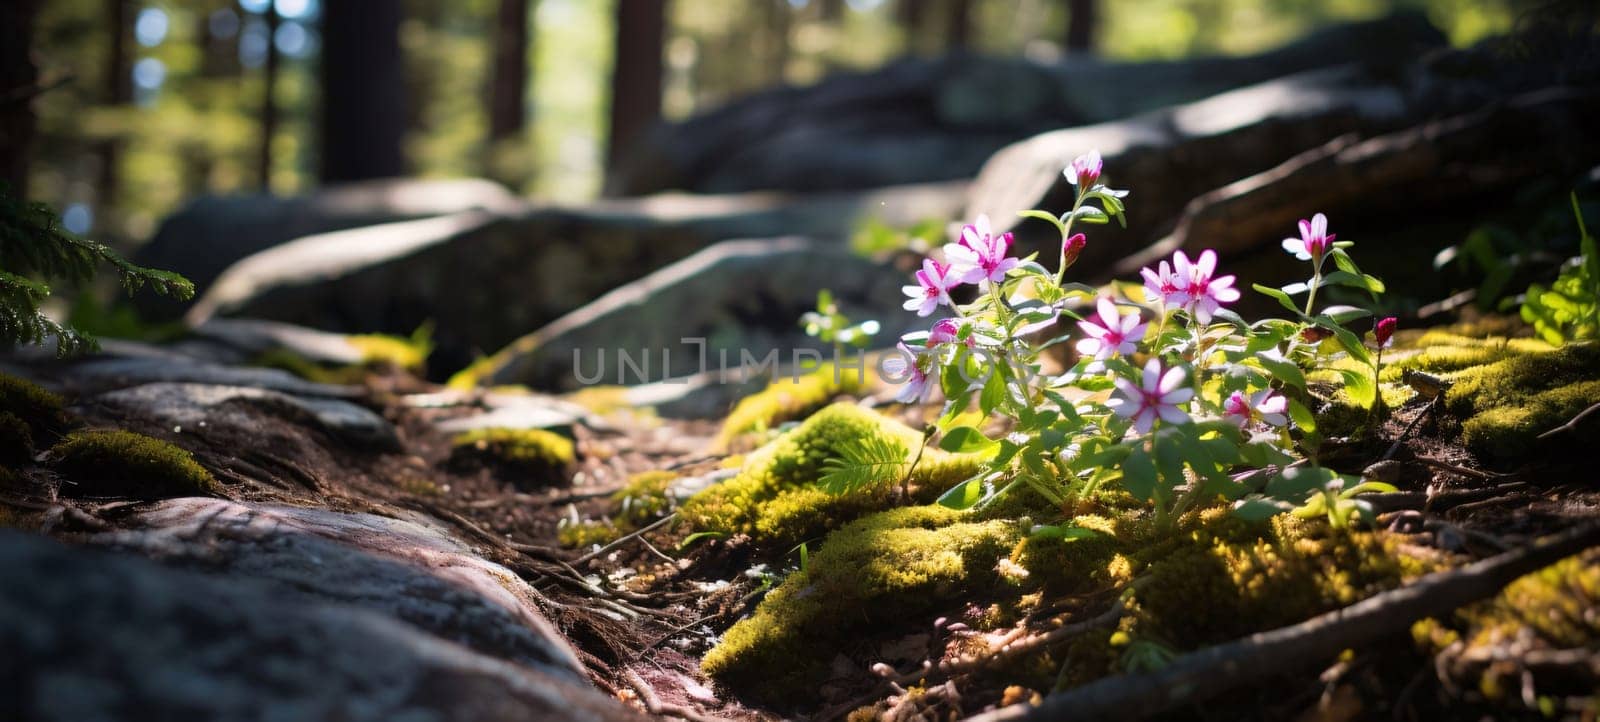 Pink flowers and moss in the forest on the mulch between stones and tree roots. Flowering flowers, a symbol of spring, new life. A joyful time of nature waking up to life.